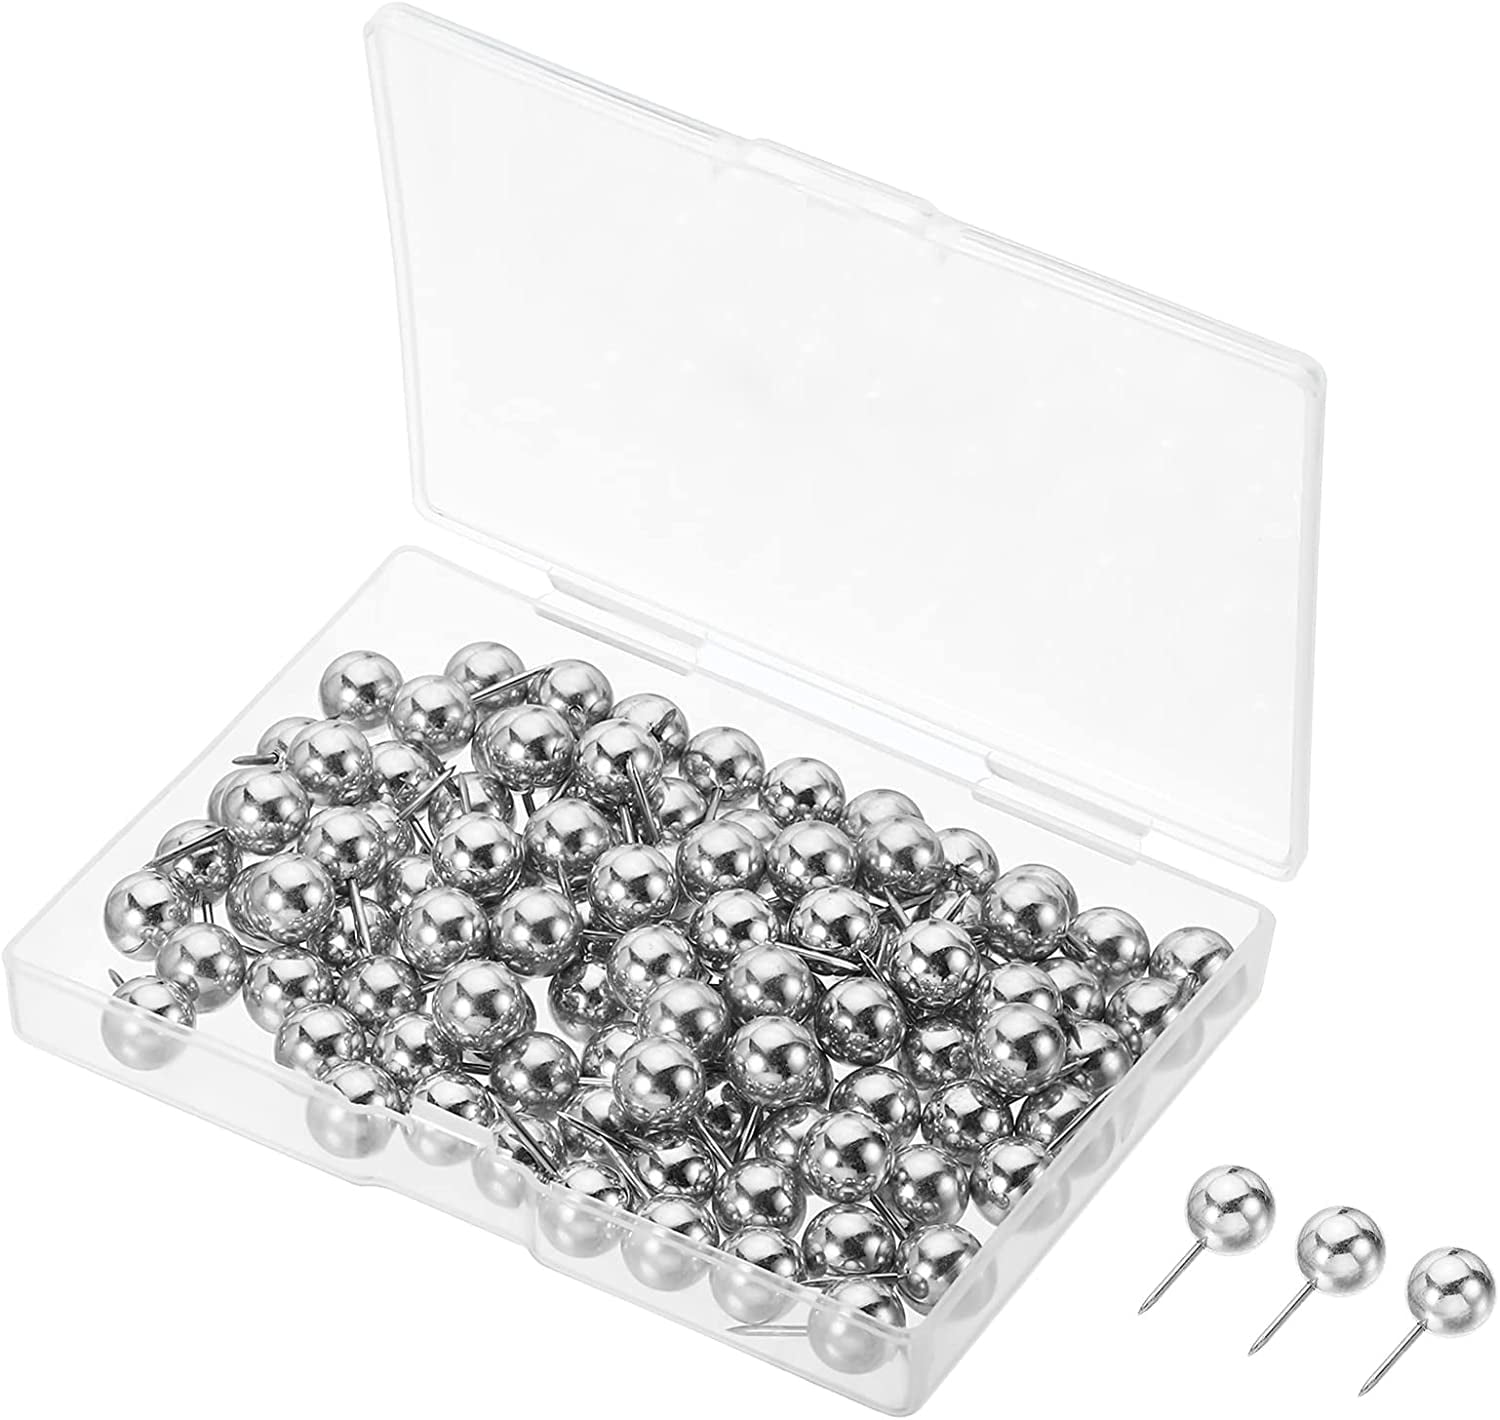 Push Pins 100 Pack Plastic Round Head Map Tacks Thumb Steel Point For